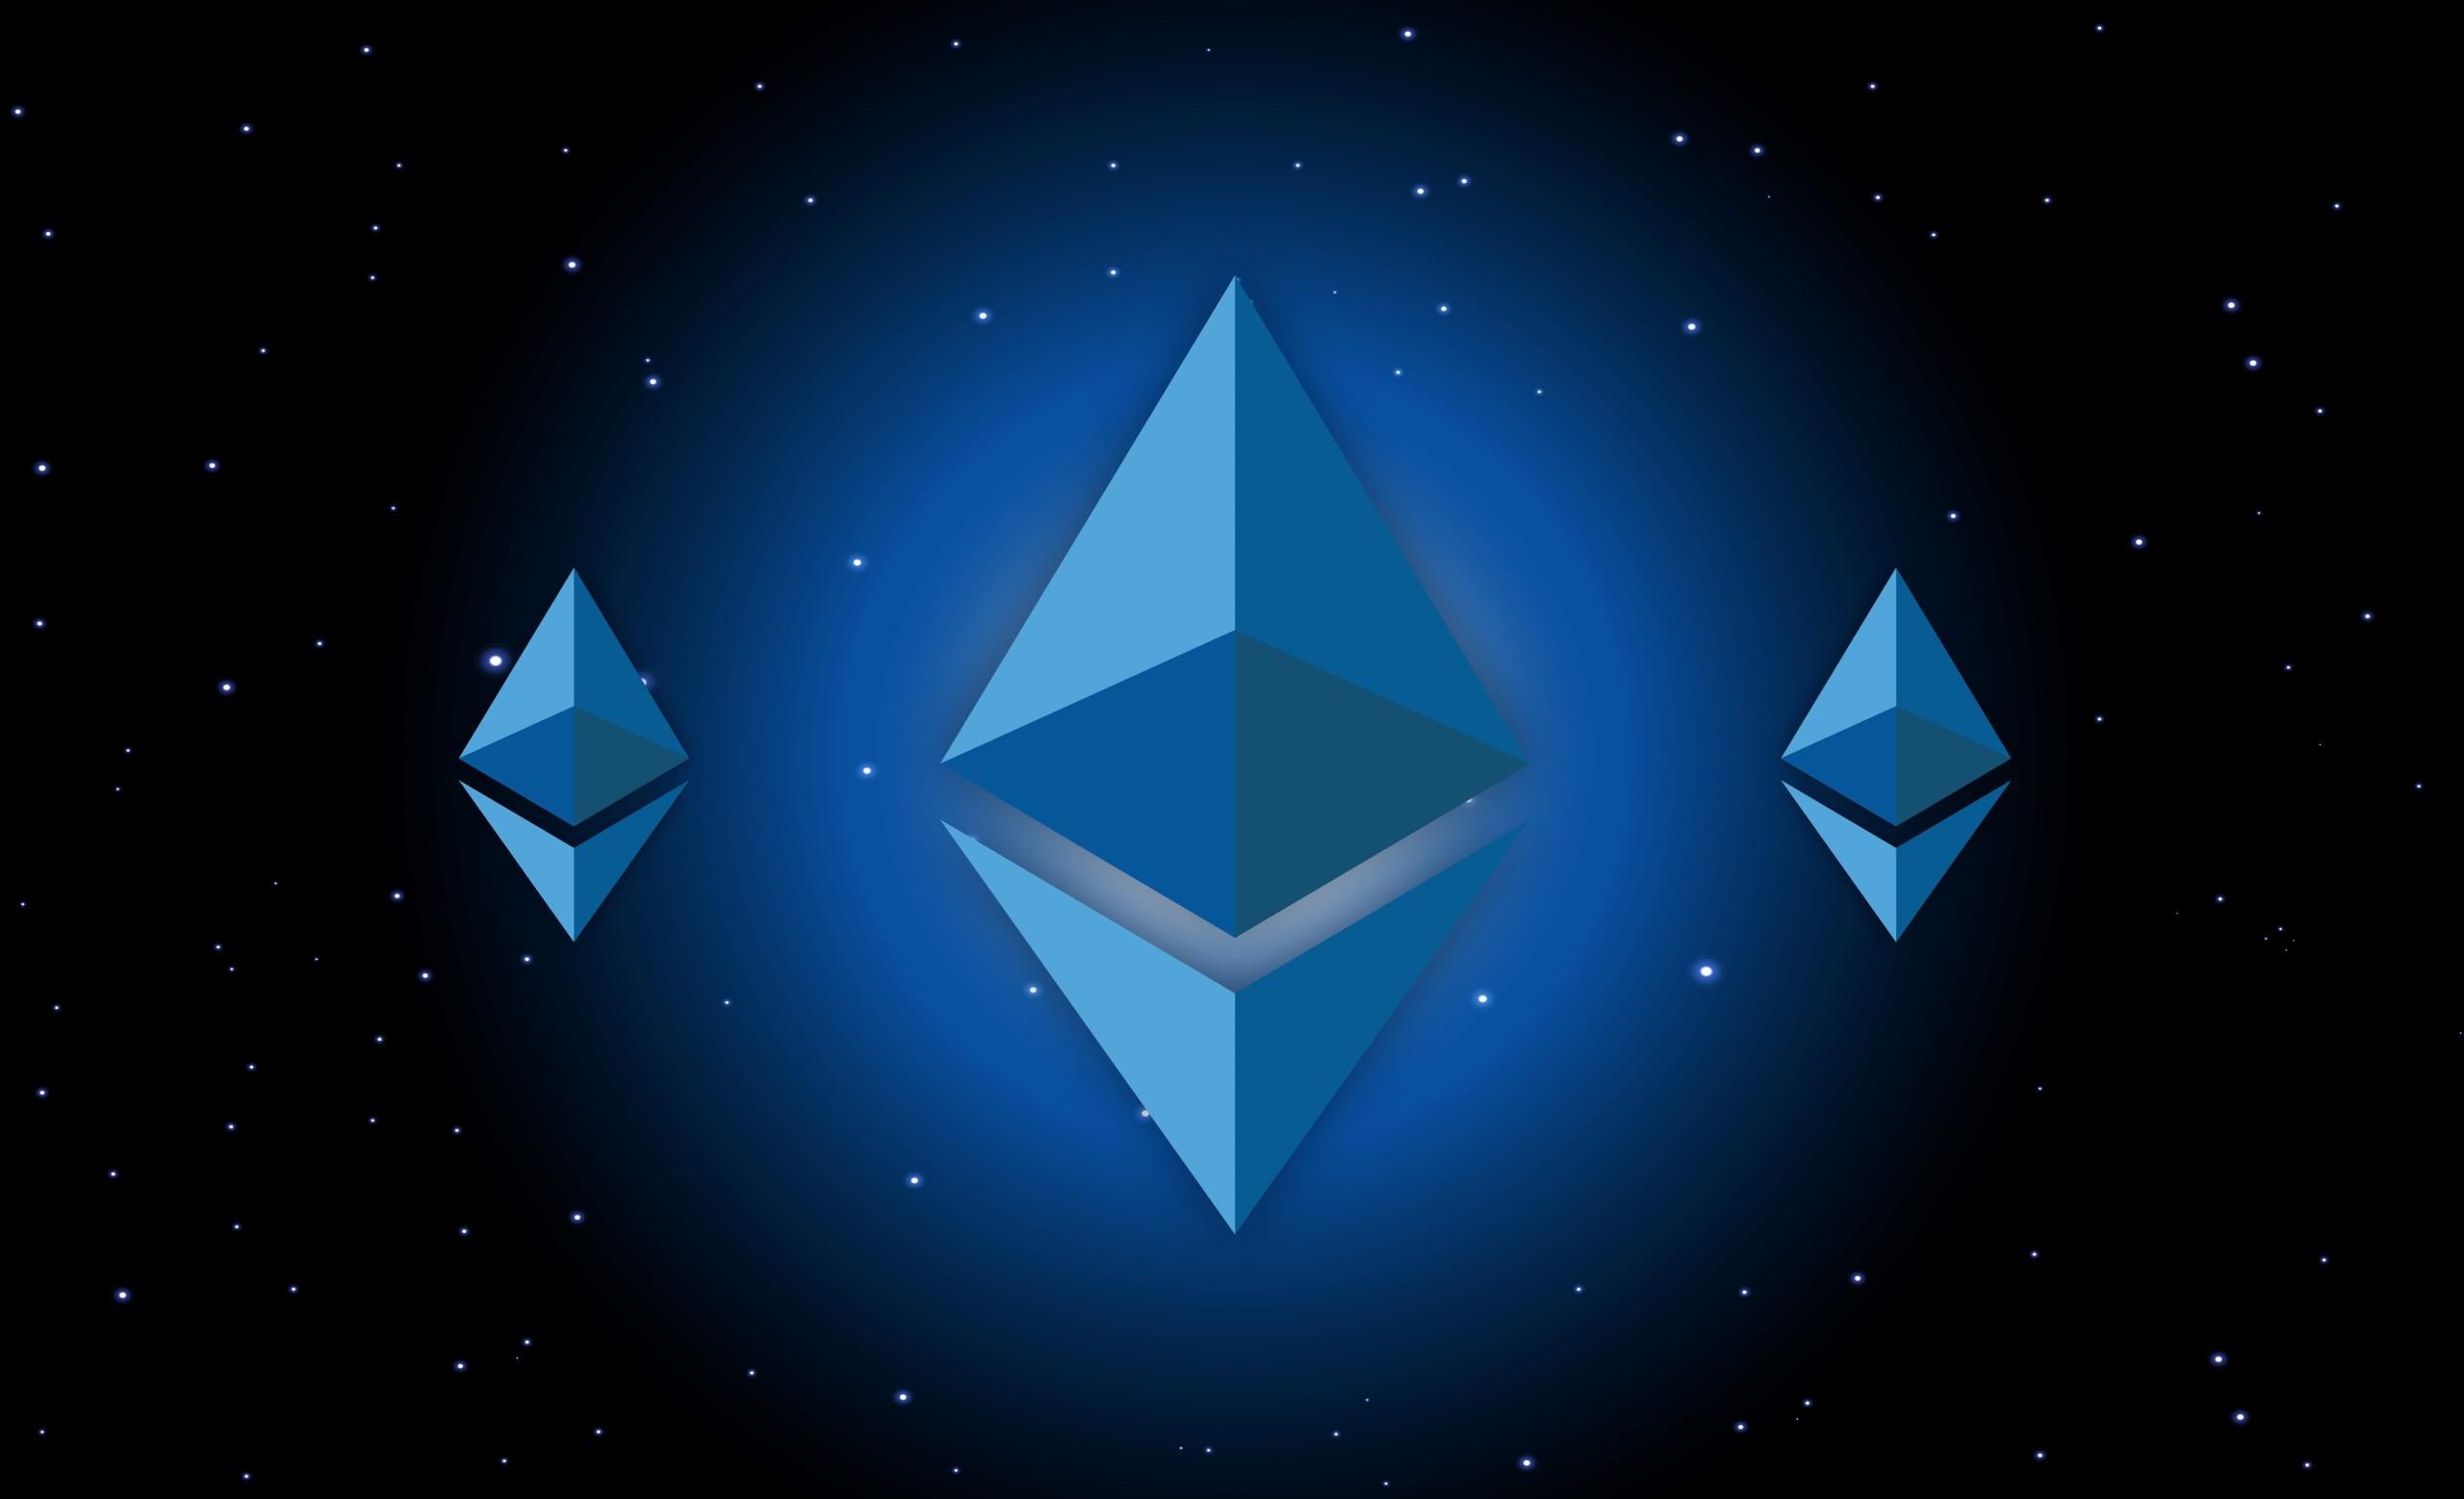 Analyst: Ethereum price will be worth $3,000 again in 2023
